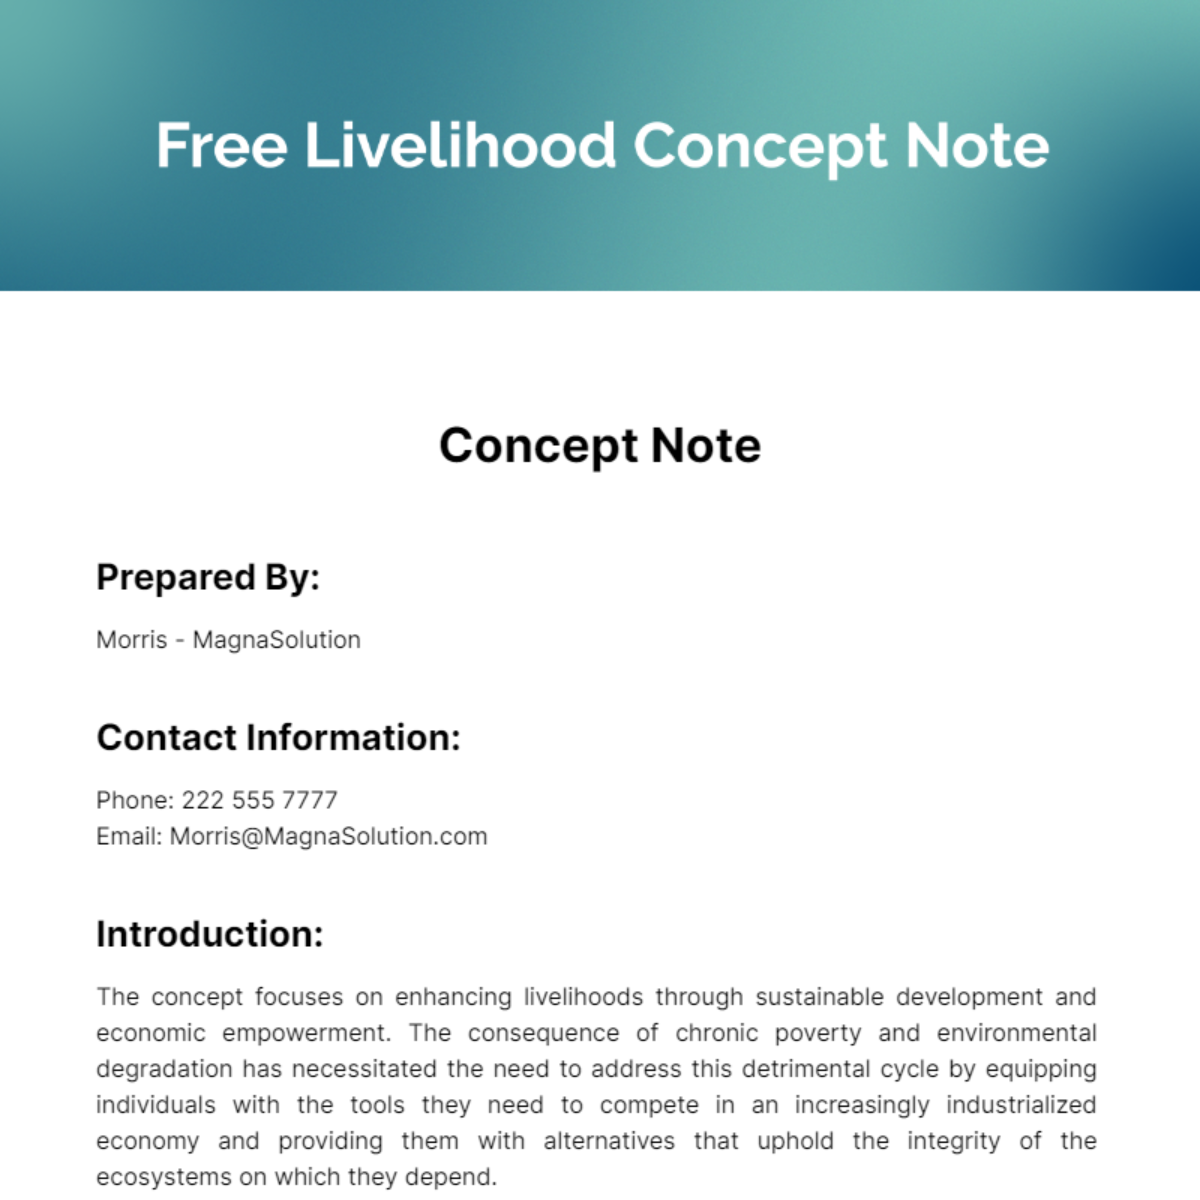 Free Livelihood Concept Note Template